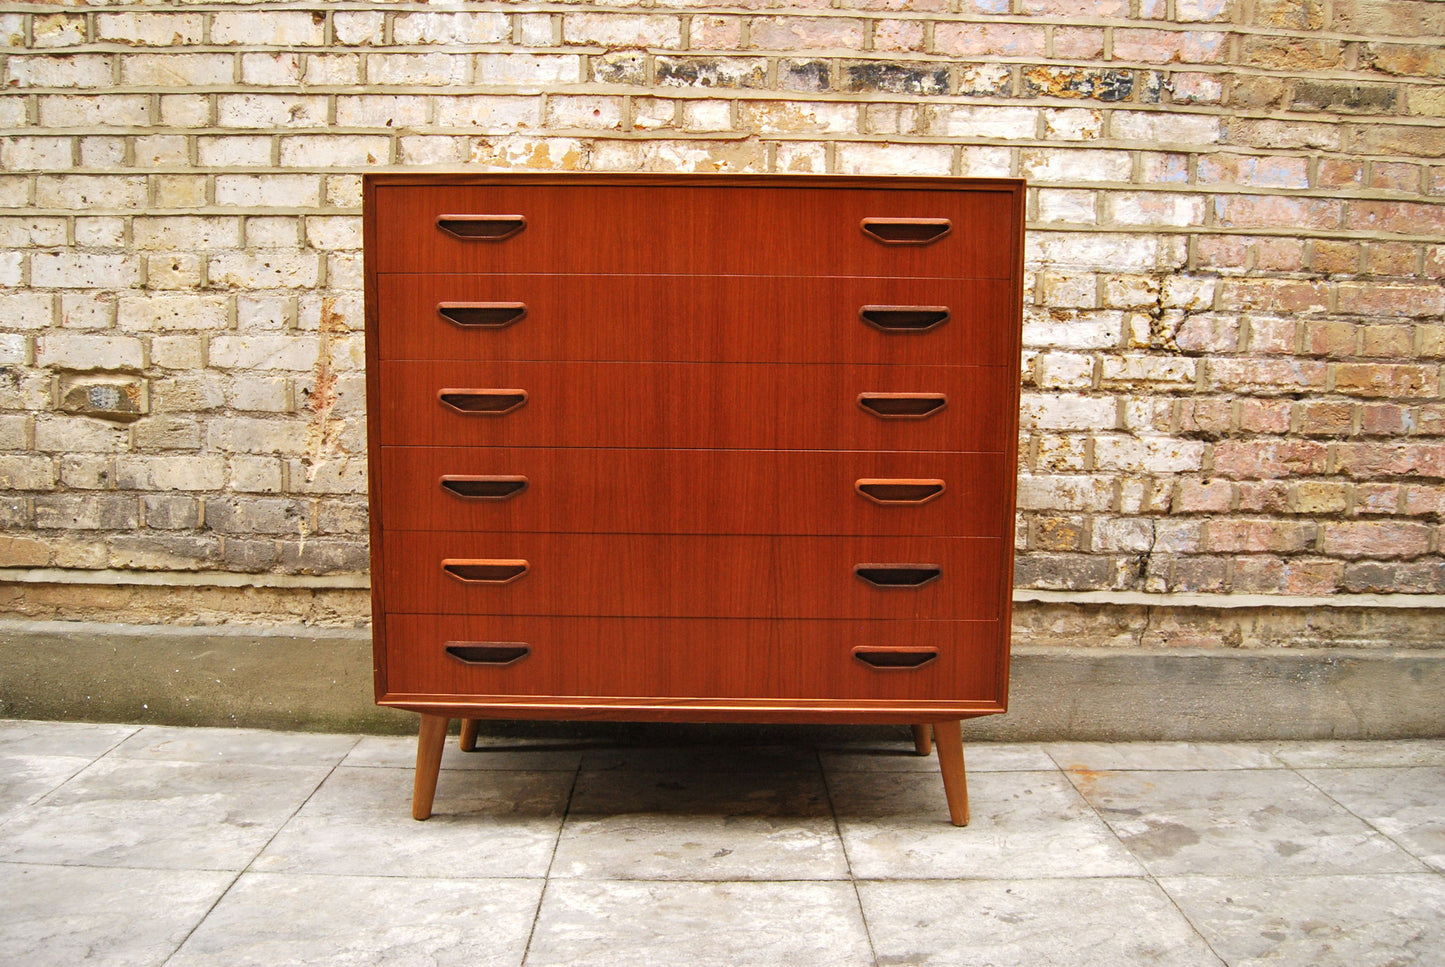 Large chest of drawers in teak